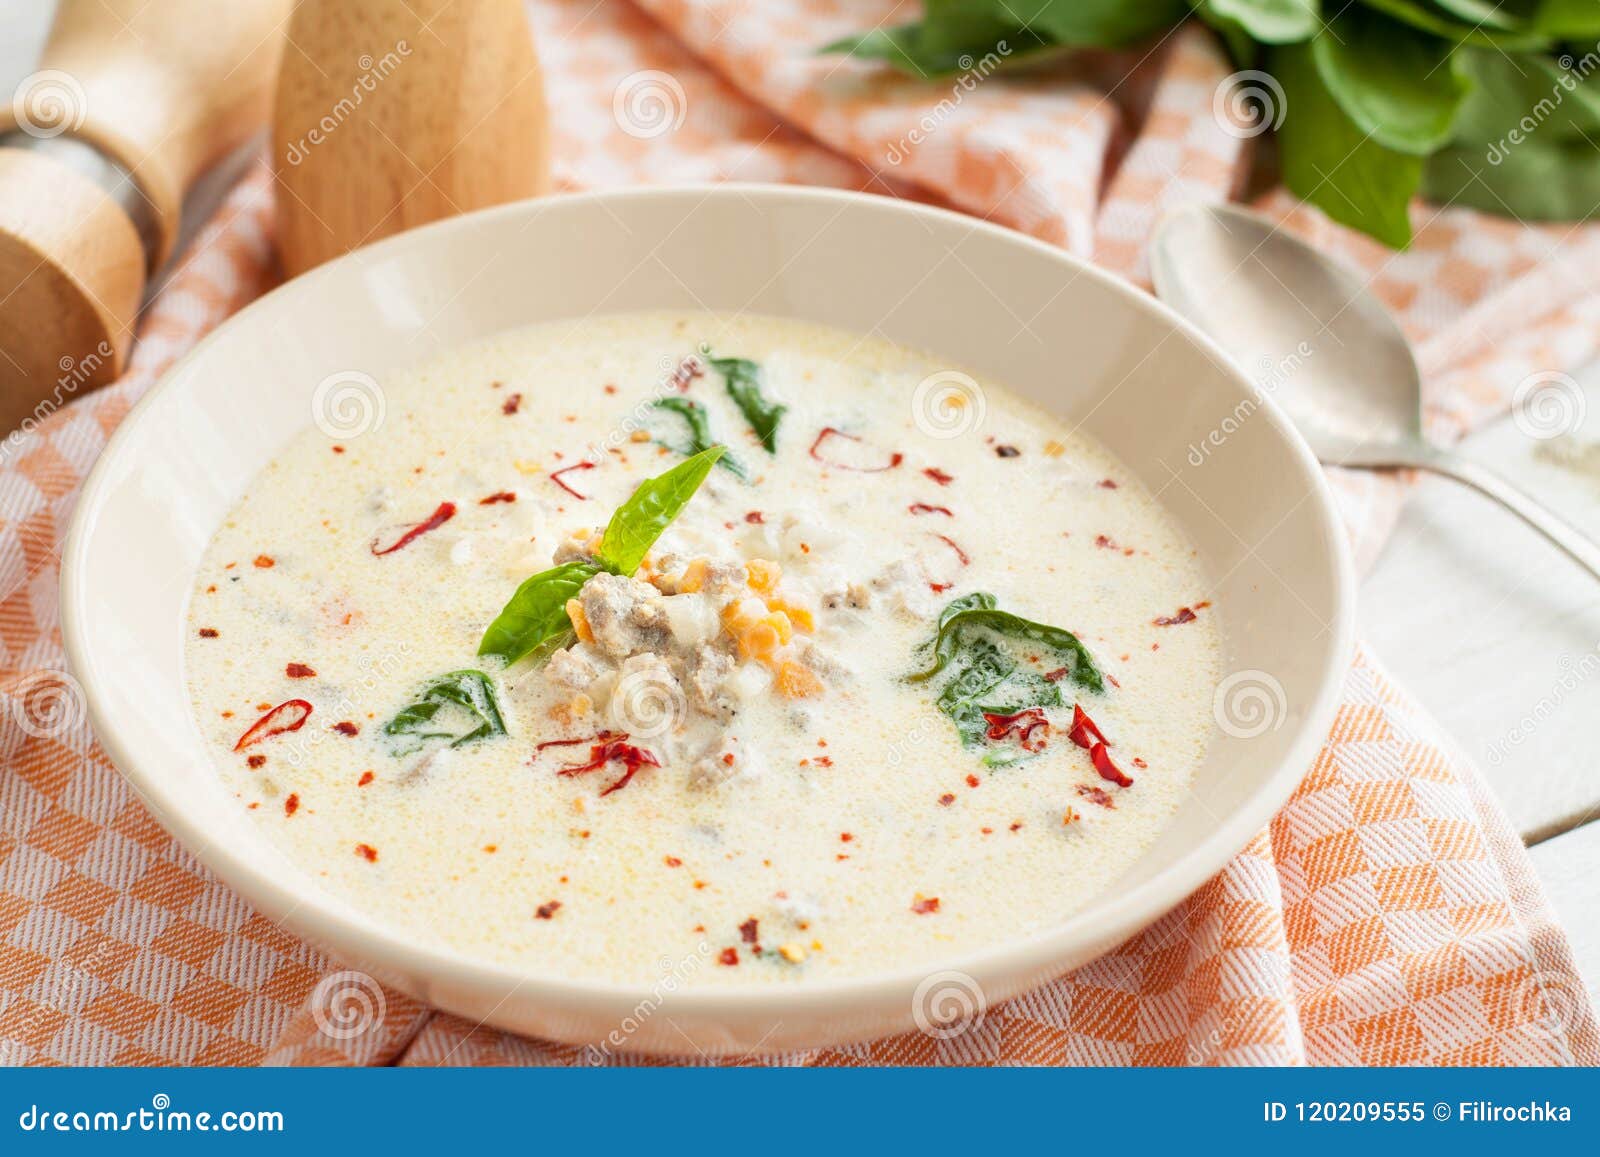 Soup with Sausages, Spinach, Vegetables and Coconut Milk Stock Image ...